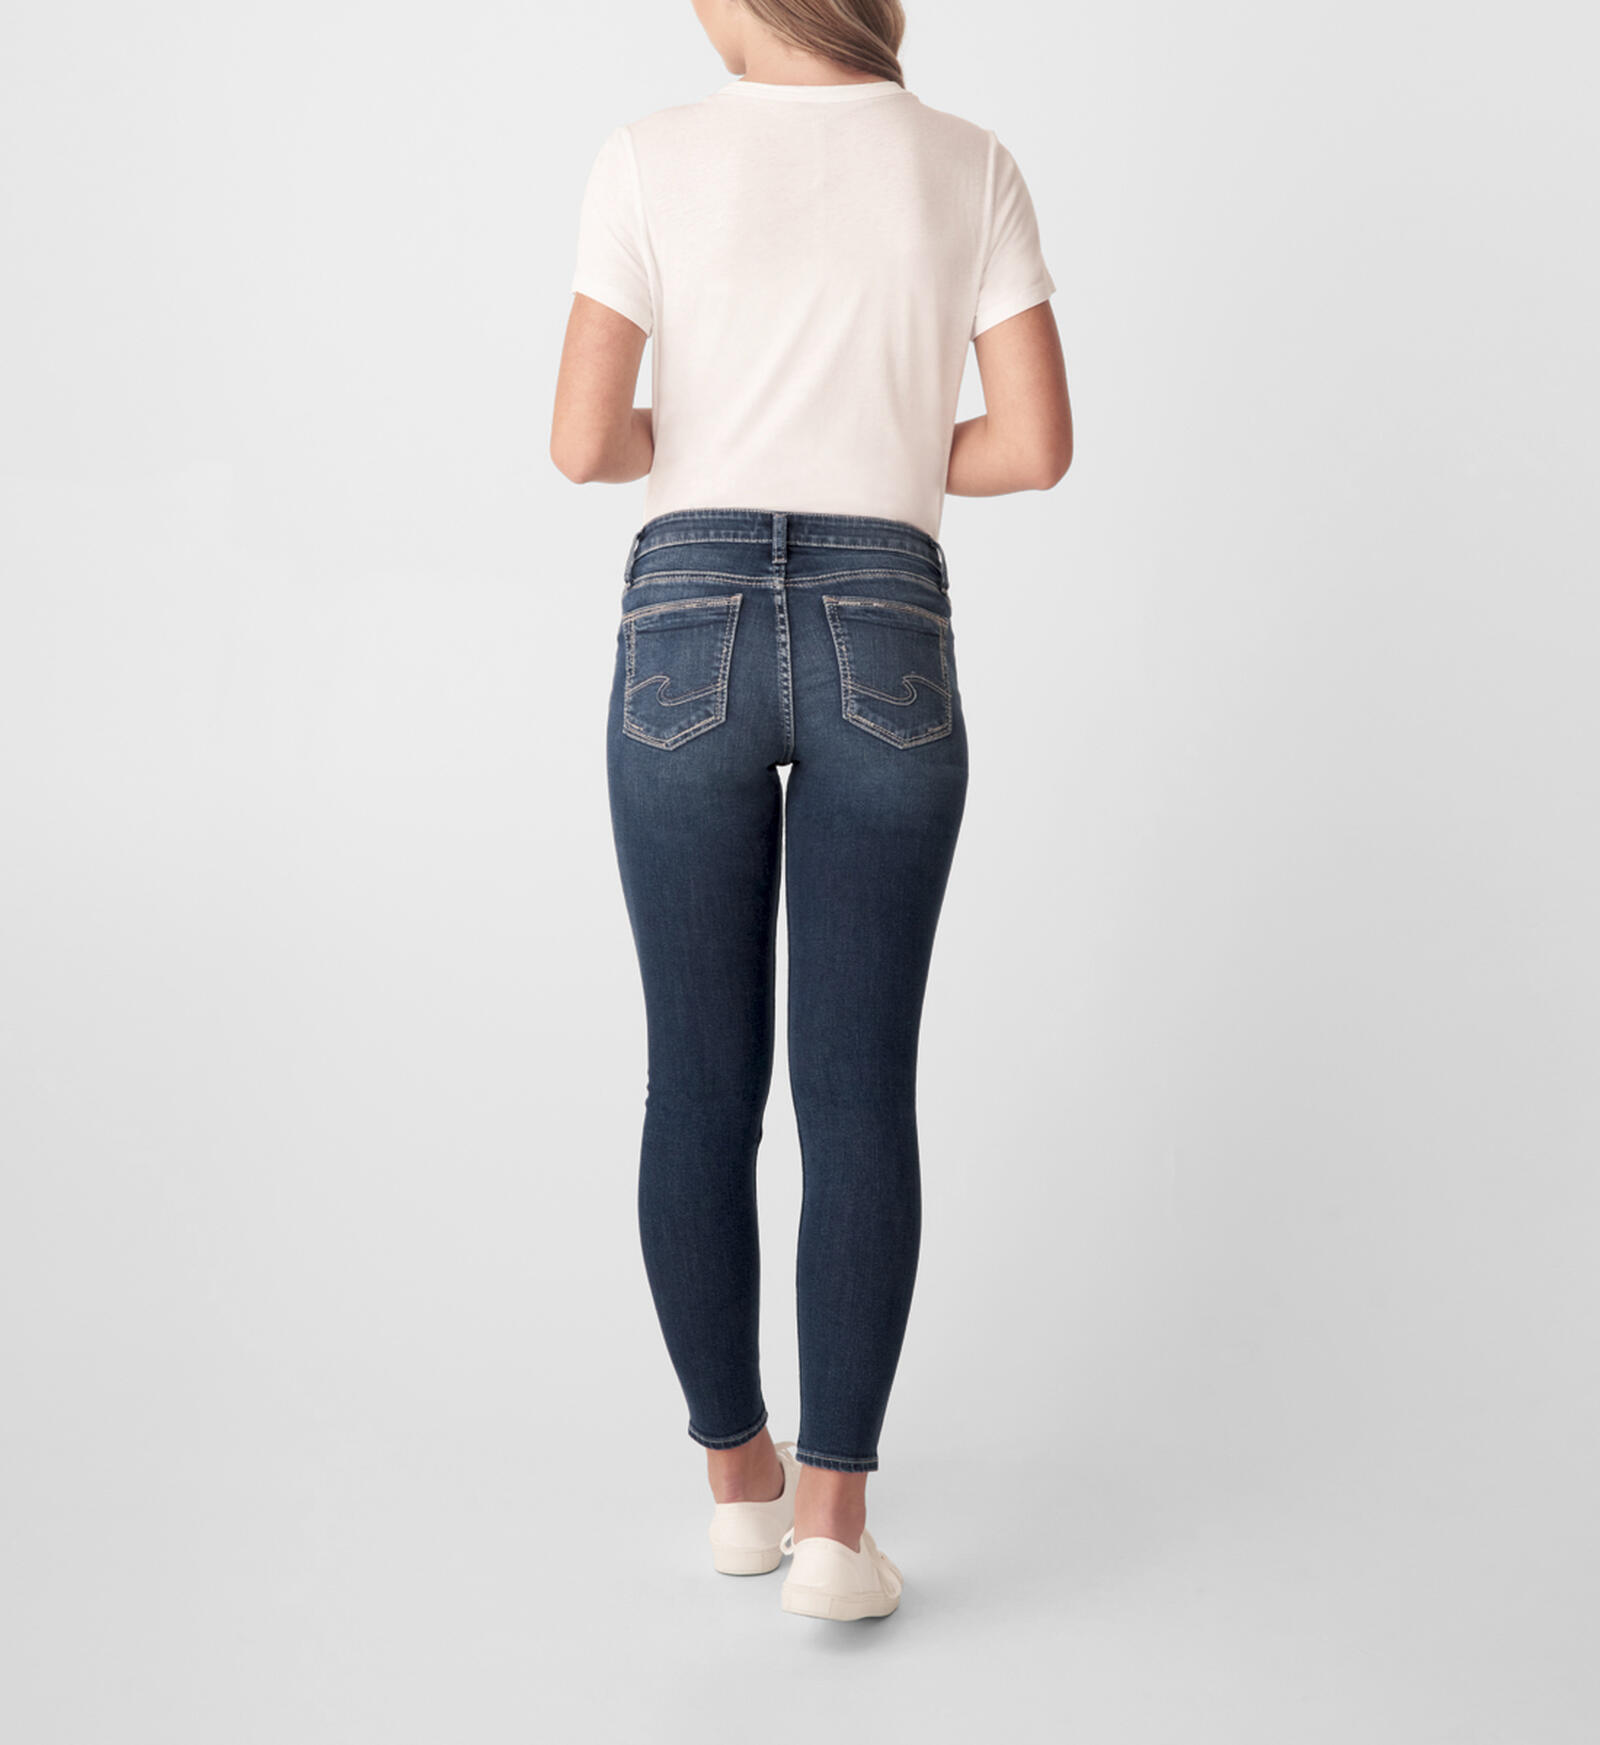 Buy Elyse Mid Rise Skinny Jeans for USD 84.00